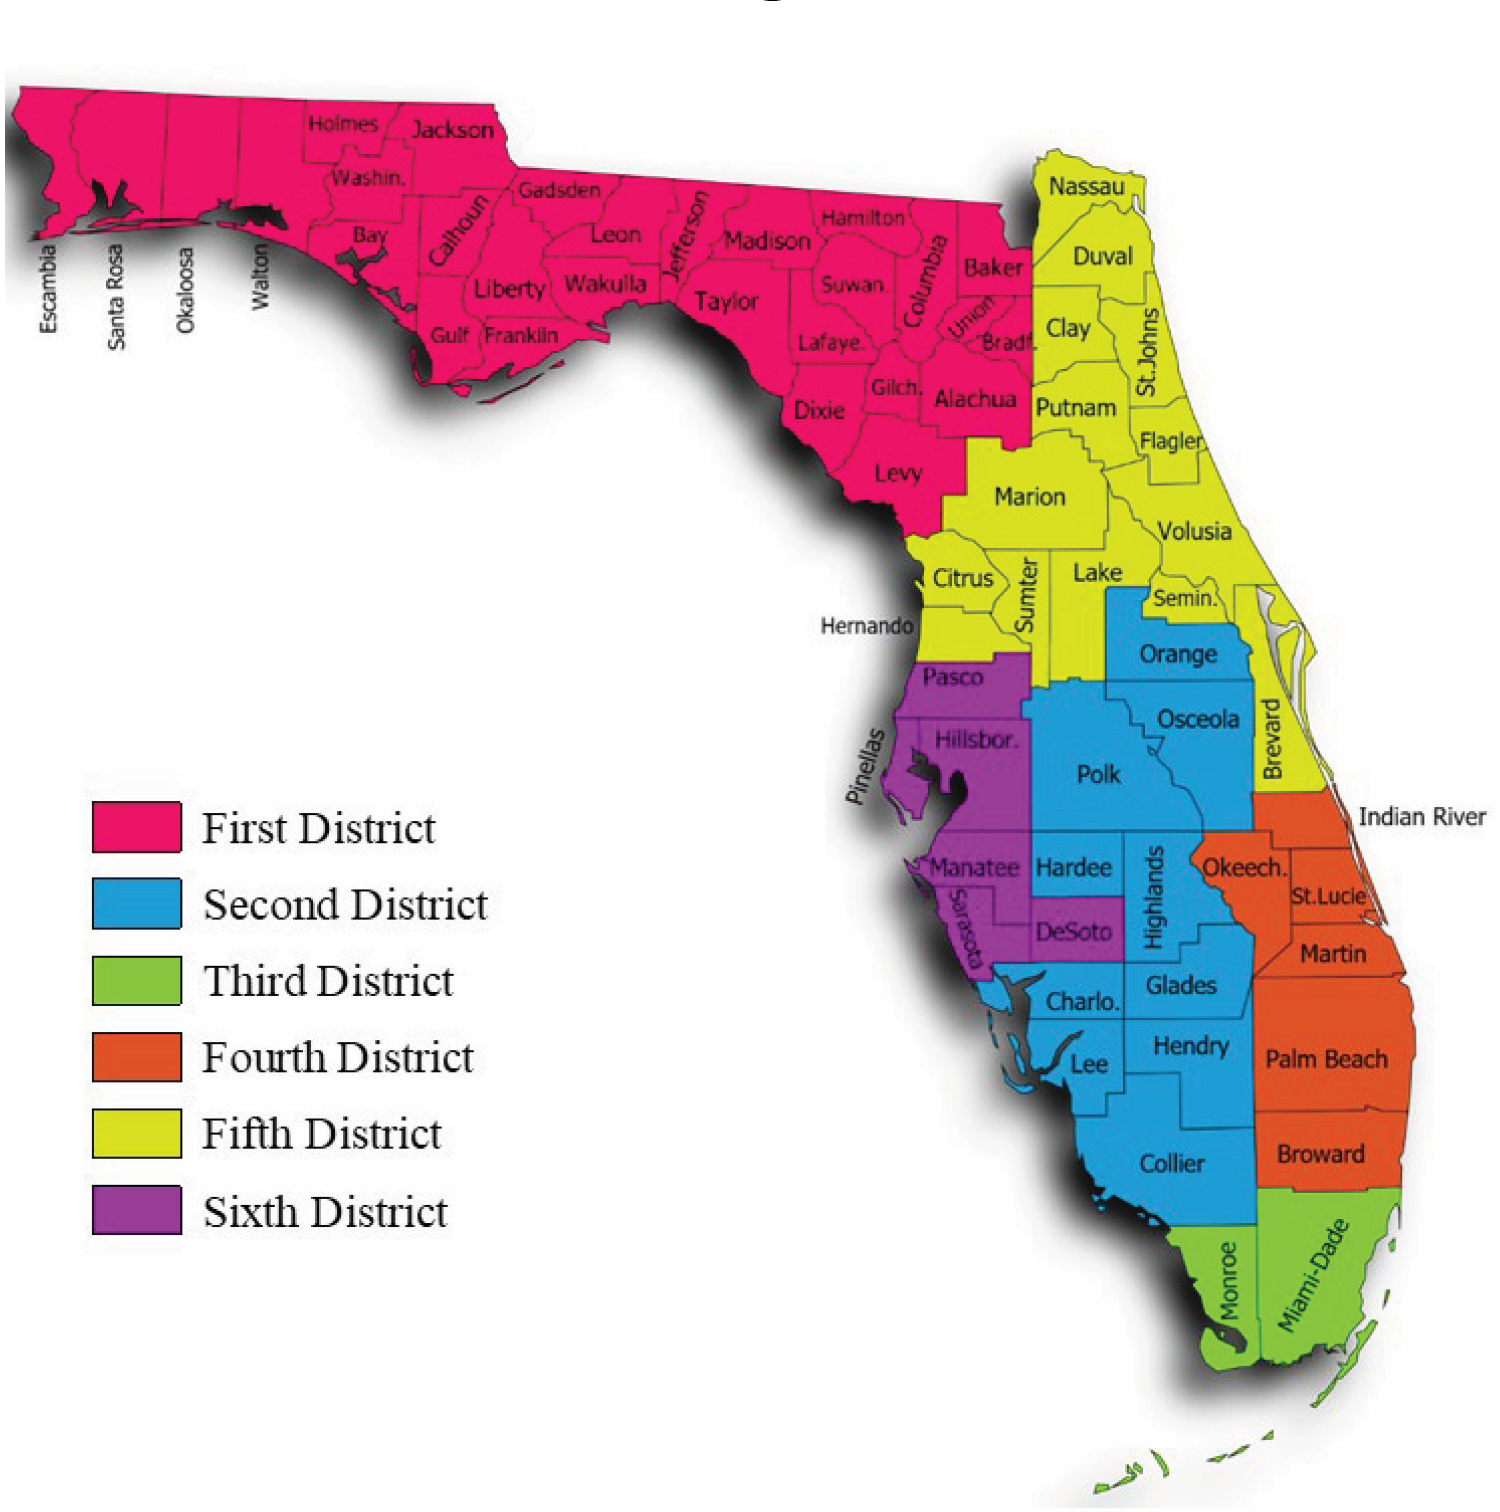 This shows the 6 geographical locations of the Florida Court of Appeal Districts